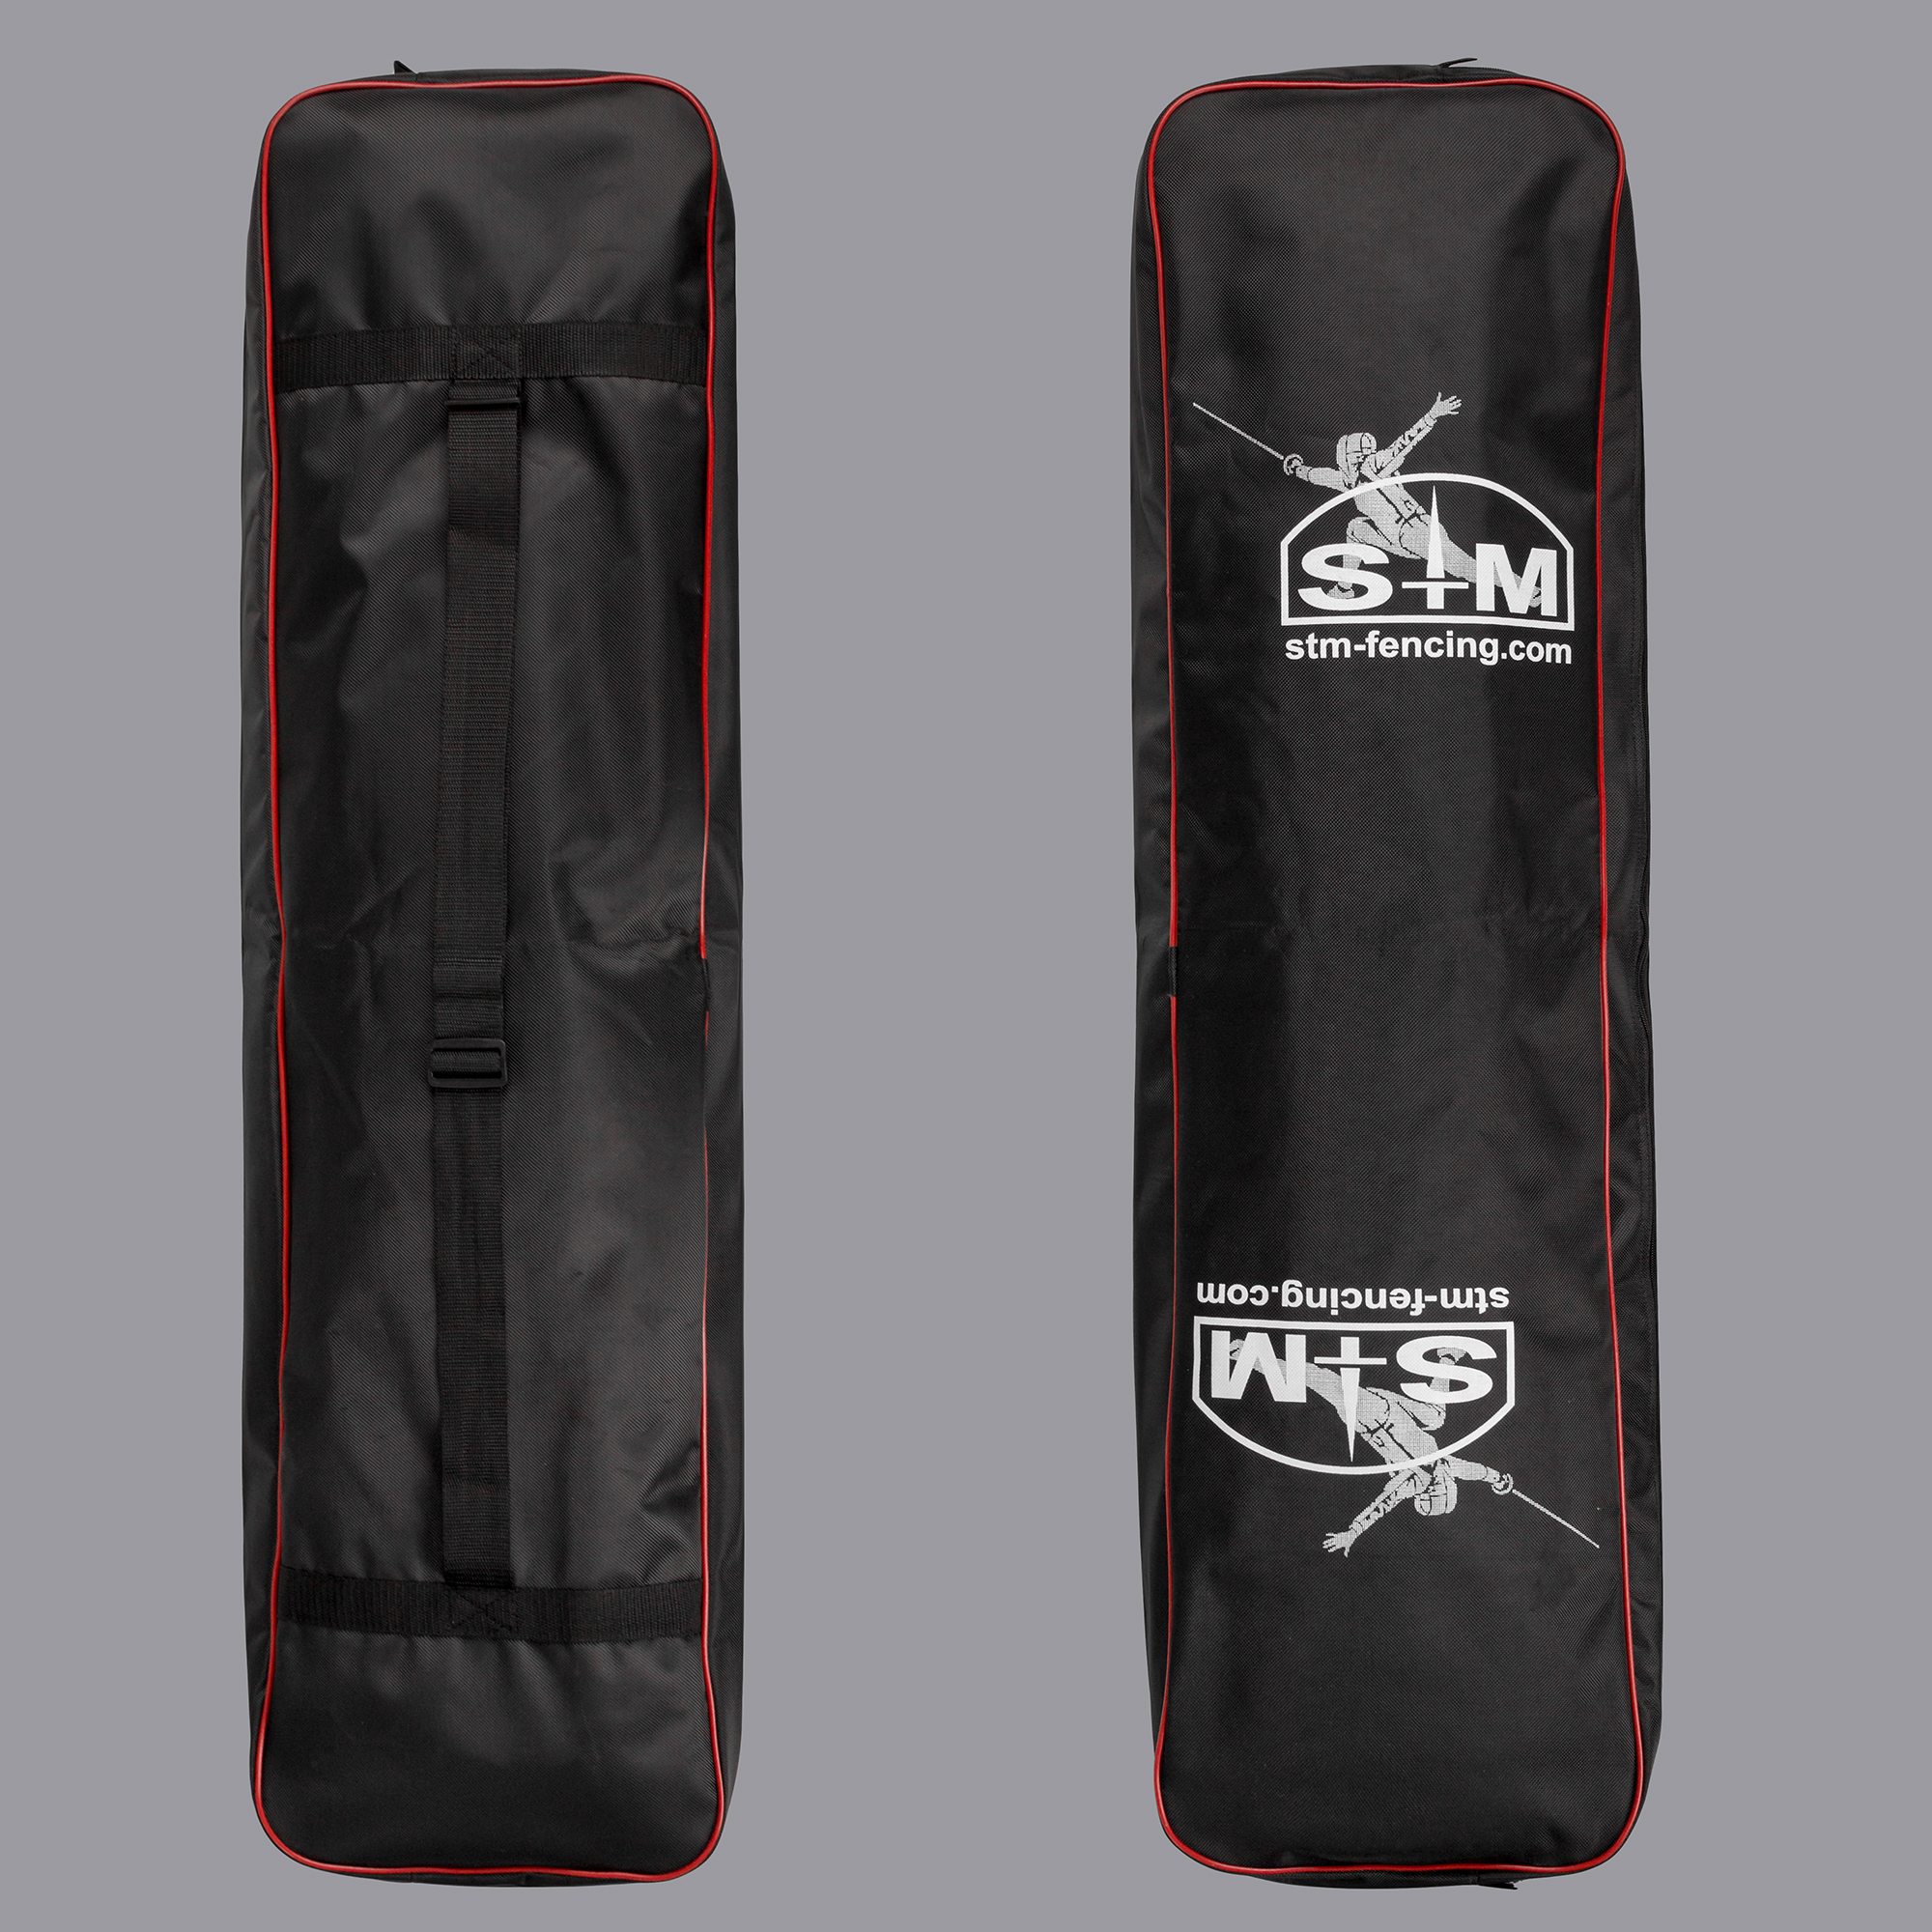 Case-bag StM for weapons (upper compartment of the RB 3 case)